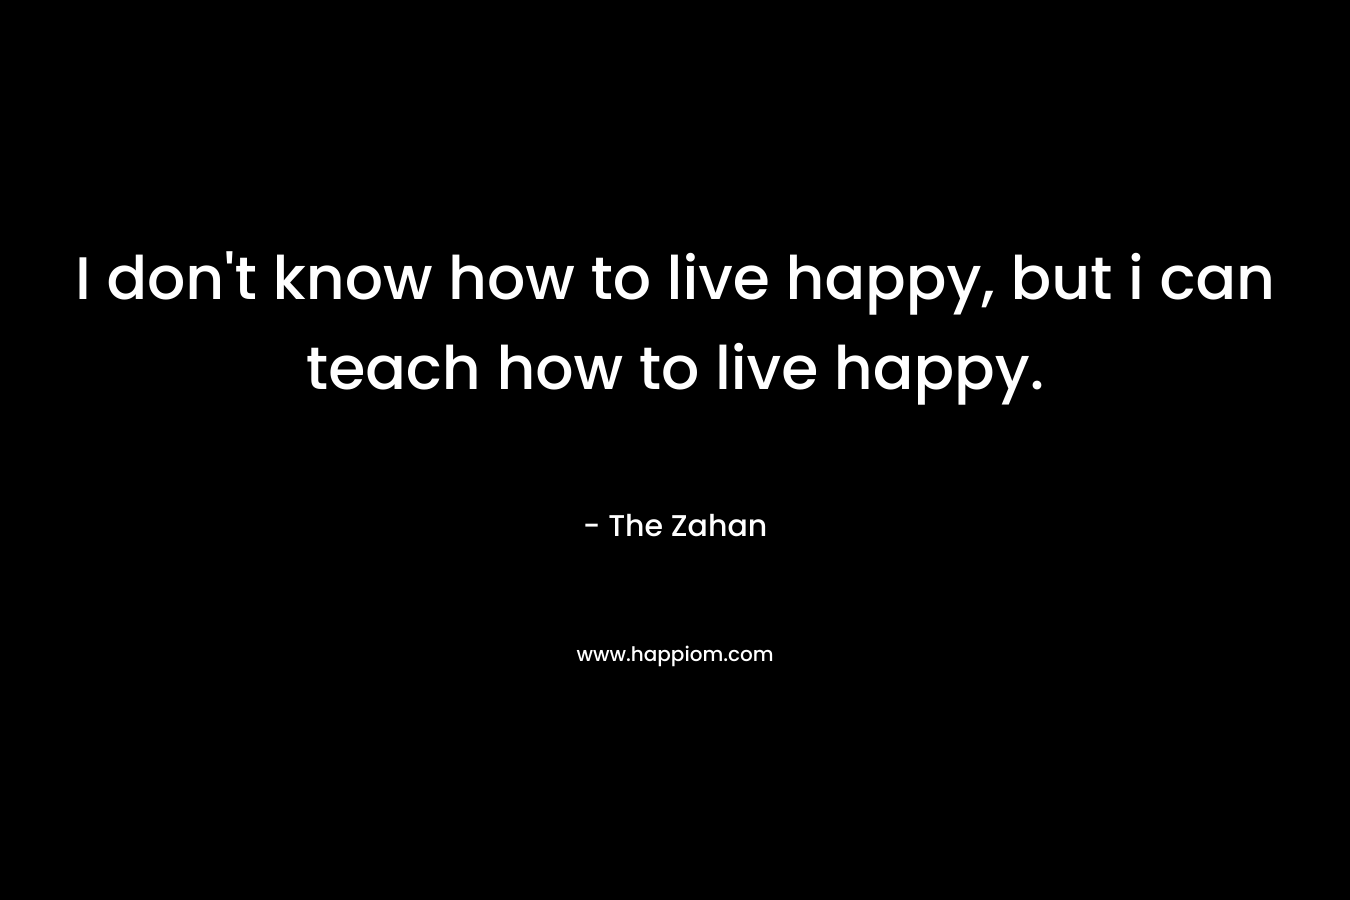 I don't know how to live happy, but i can teach how to live happy.